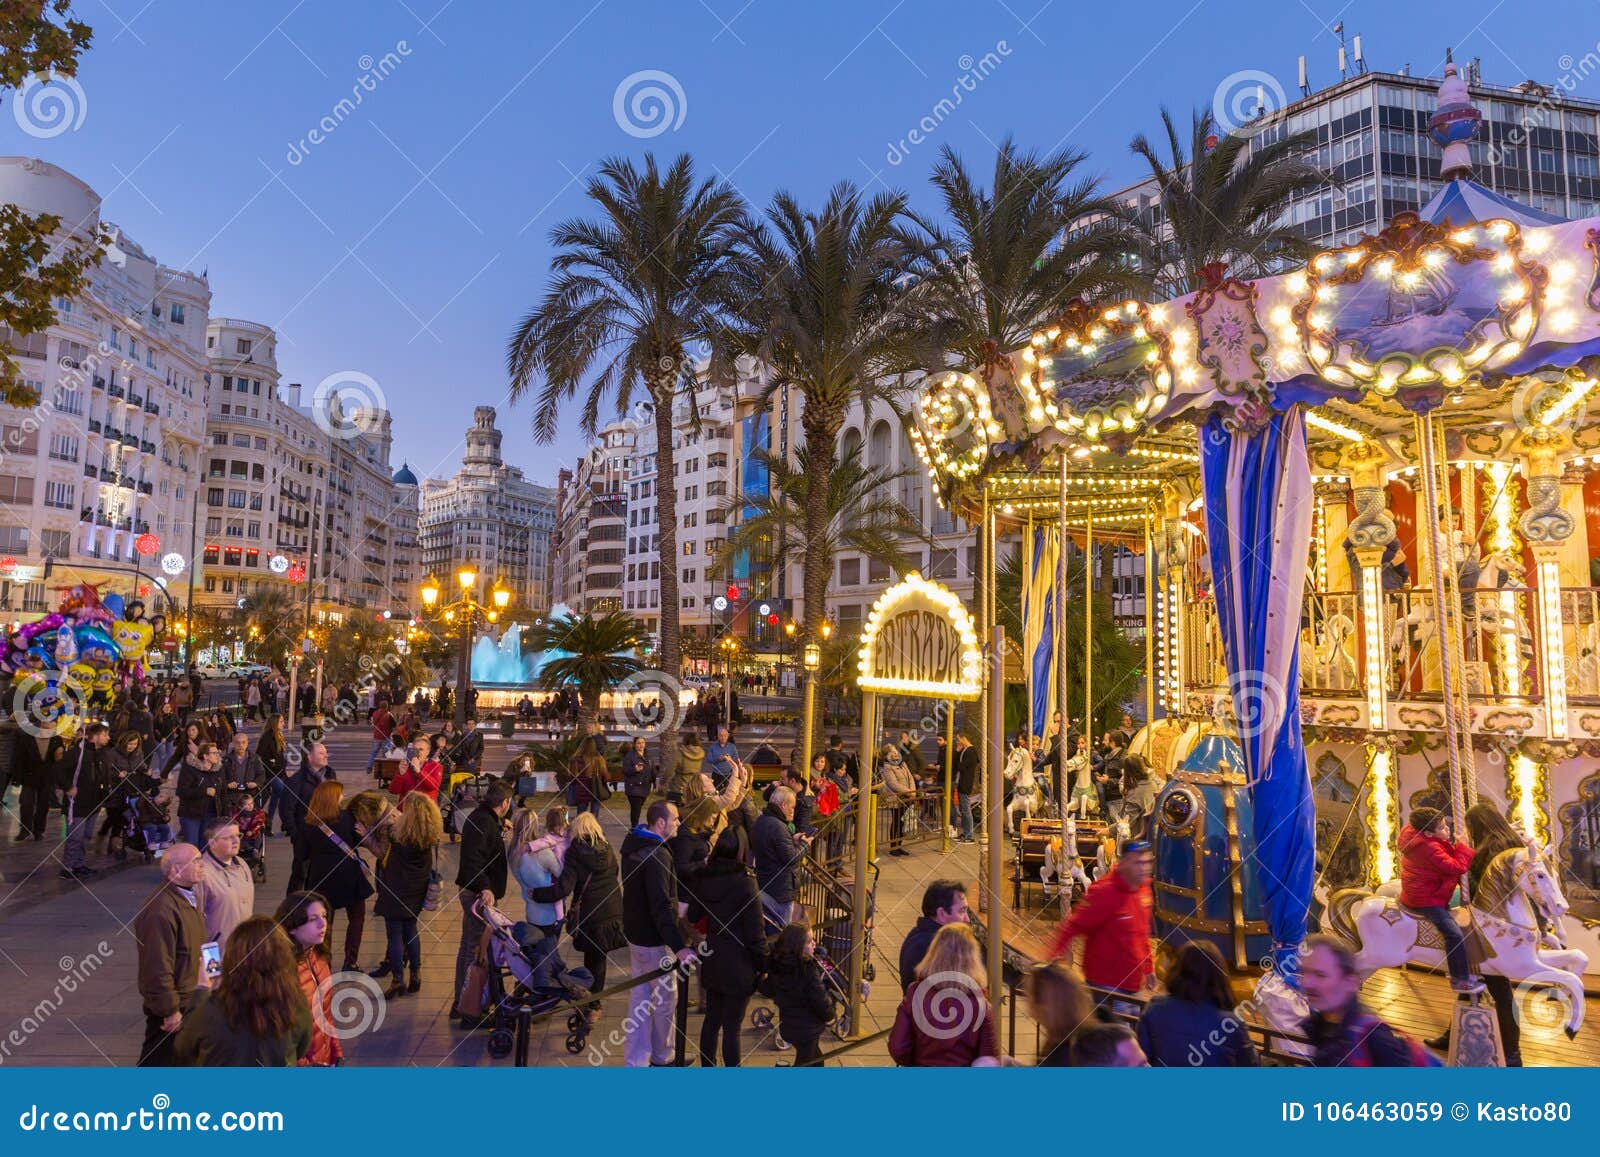 Christmas Fair with Carousel on Modernisme Plaza of City Hall of Valencia, Spain. Editorial Image - Image of plaza: 106463059